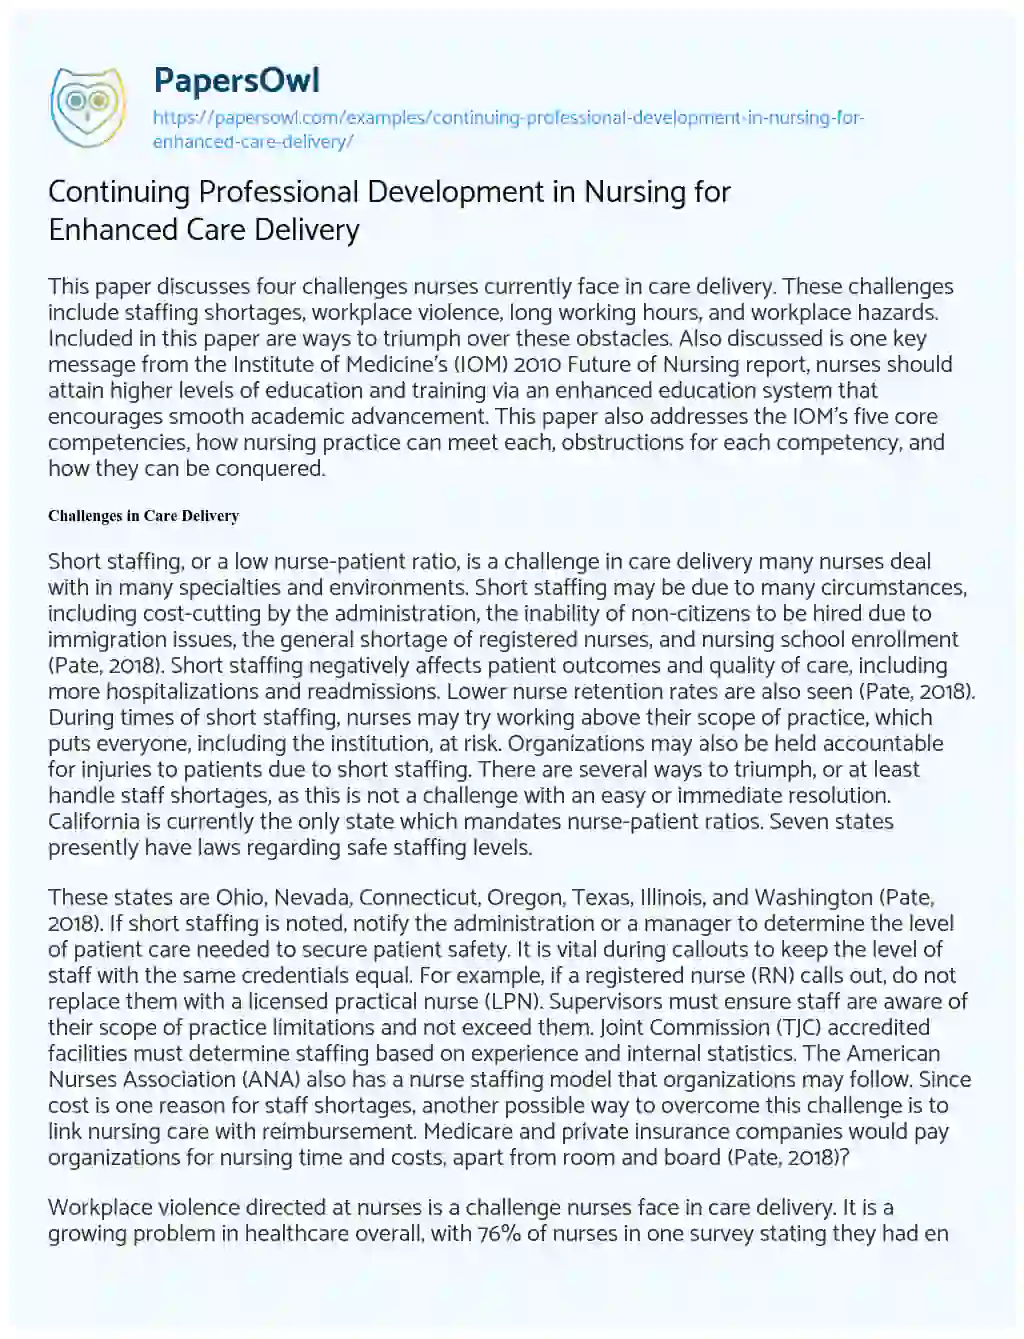 Essay on Continuing Professional Development in Nursing for Enhanced Care Delivery